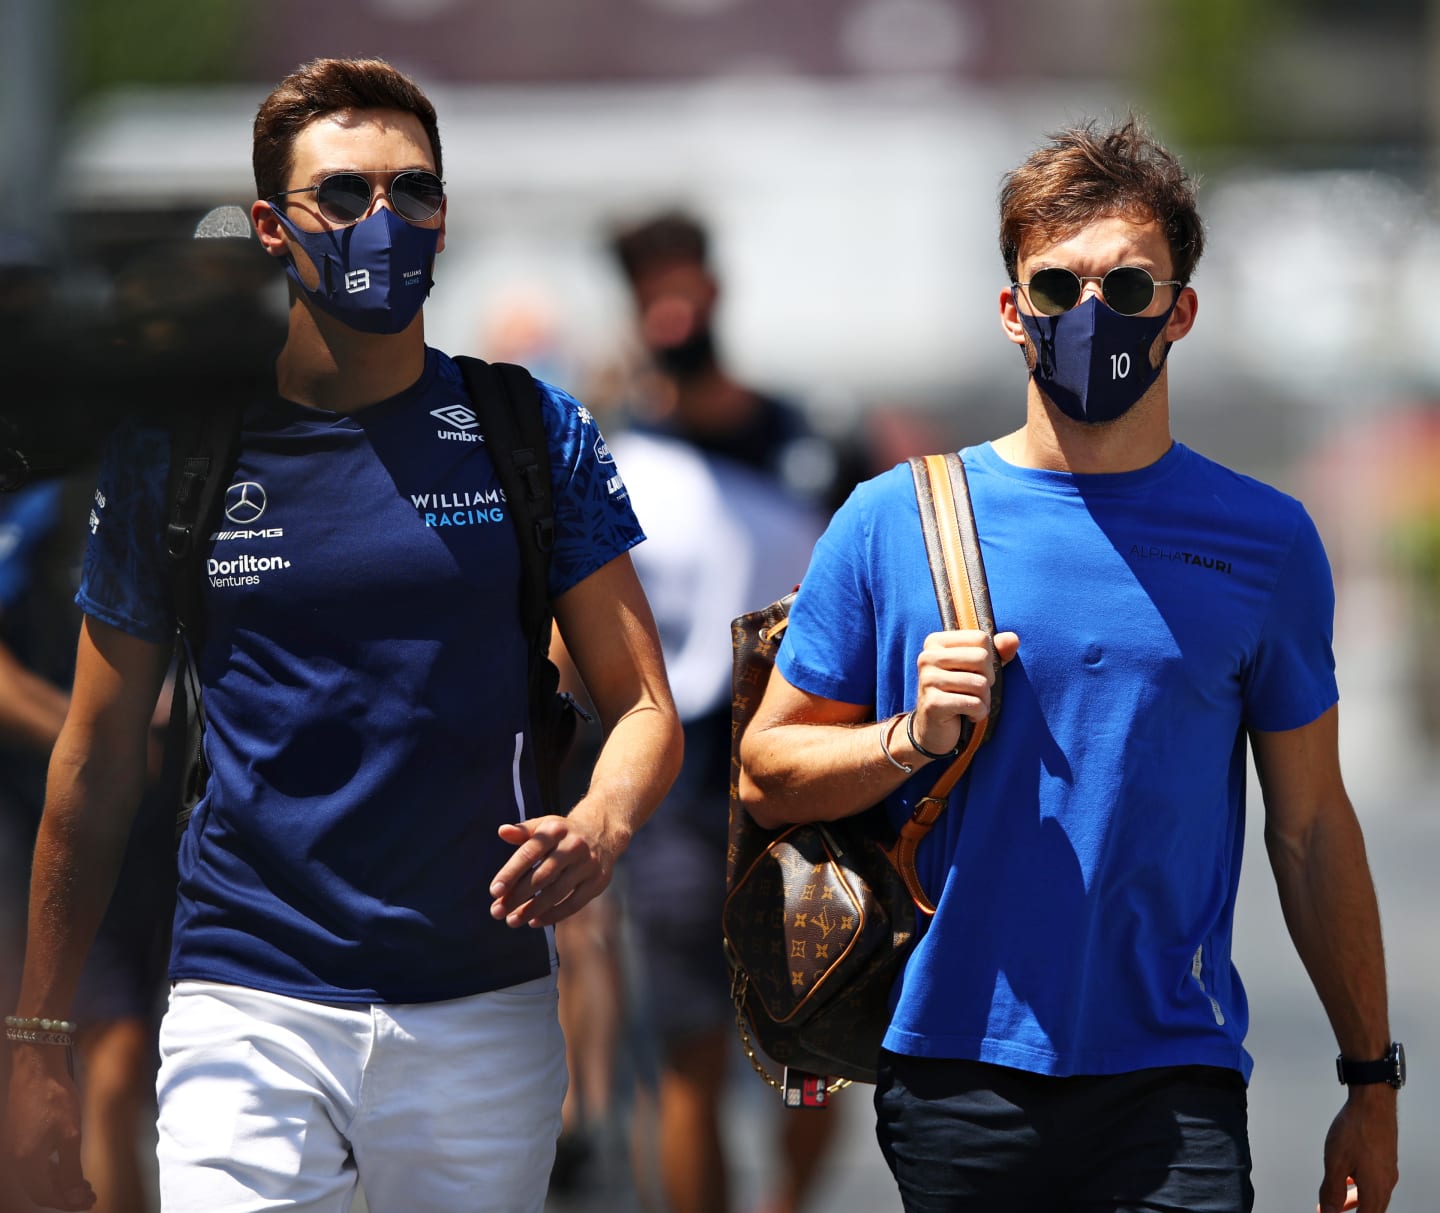 BAKU, AZERBAIJAN - JUNE 05: George Russell of Great Britain and Williams and Pierre Gasly of France and Scuderia AlphaTauri walk in the Paddock before final practice ahead of the F1 Grand Prix of Azerbaijan at Baku City Circuit on June 05, 2021 in Baku, Azerbaijan. (Photo by Mark Thompson/Getty Images)